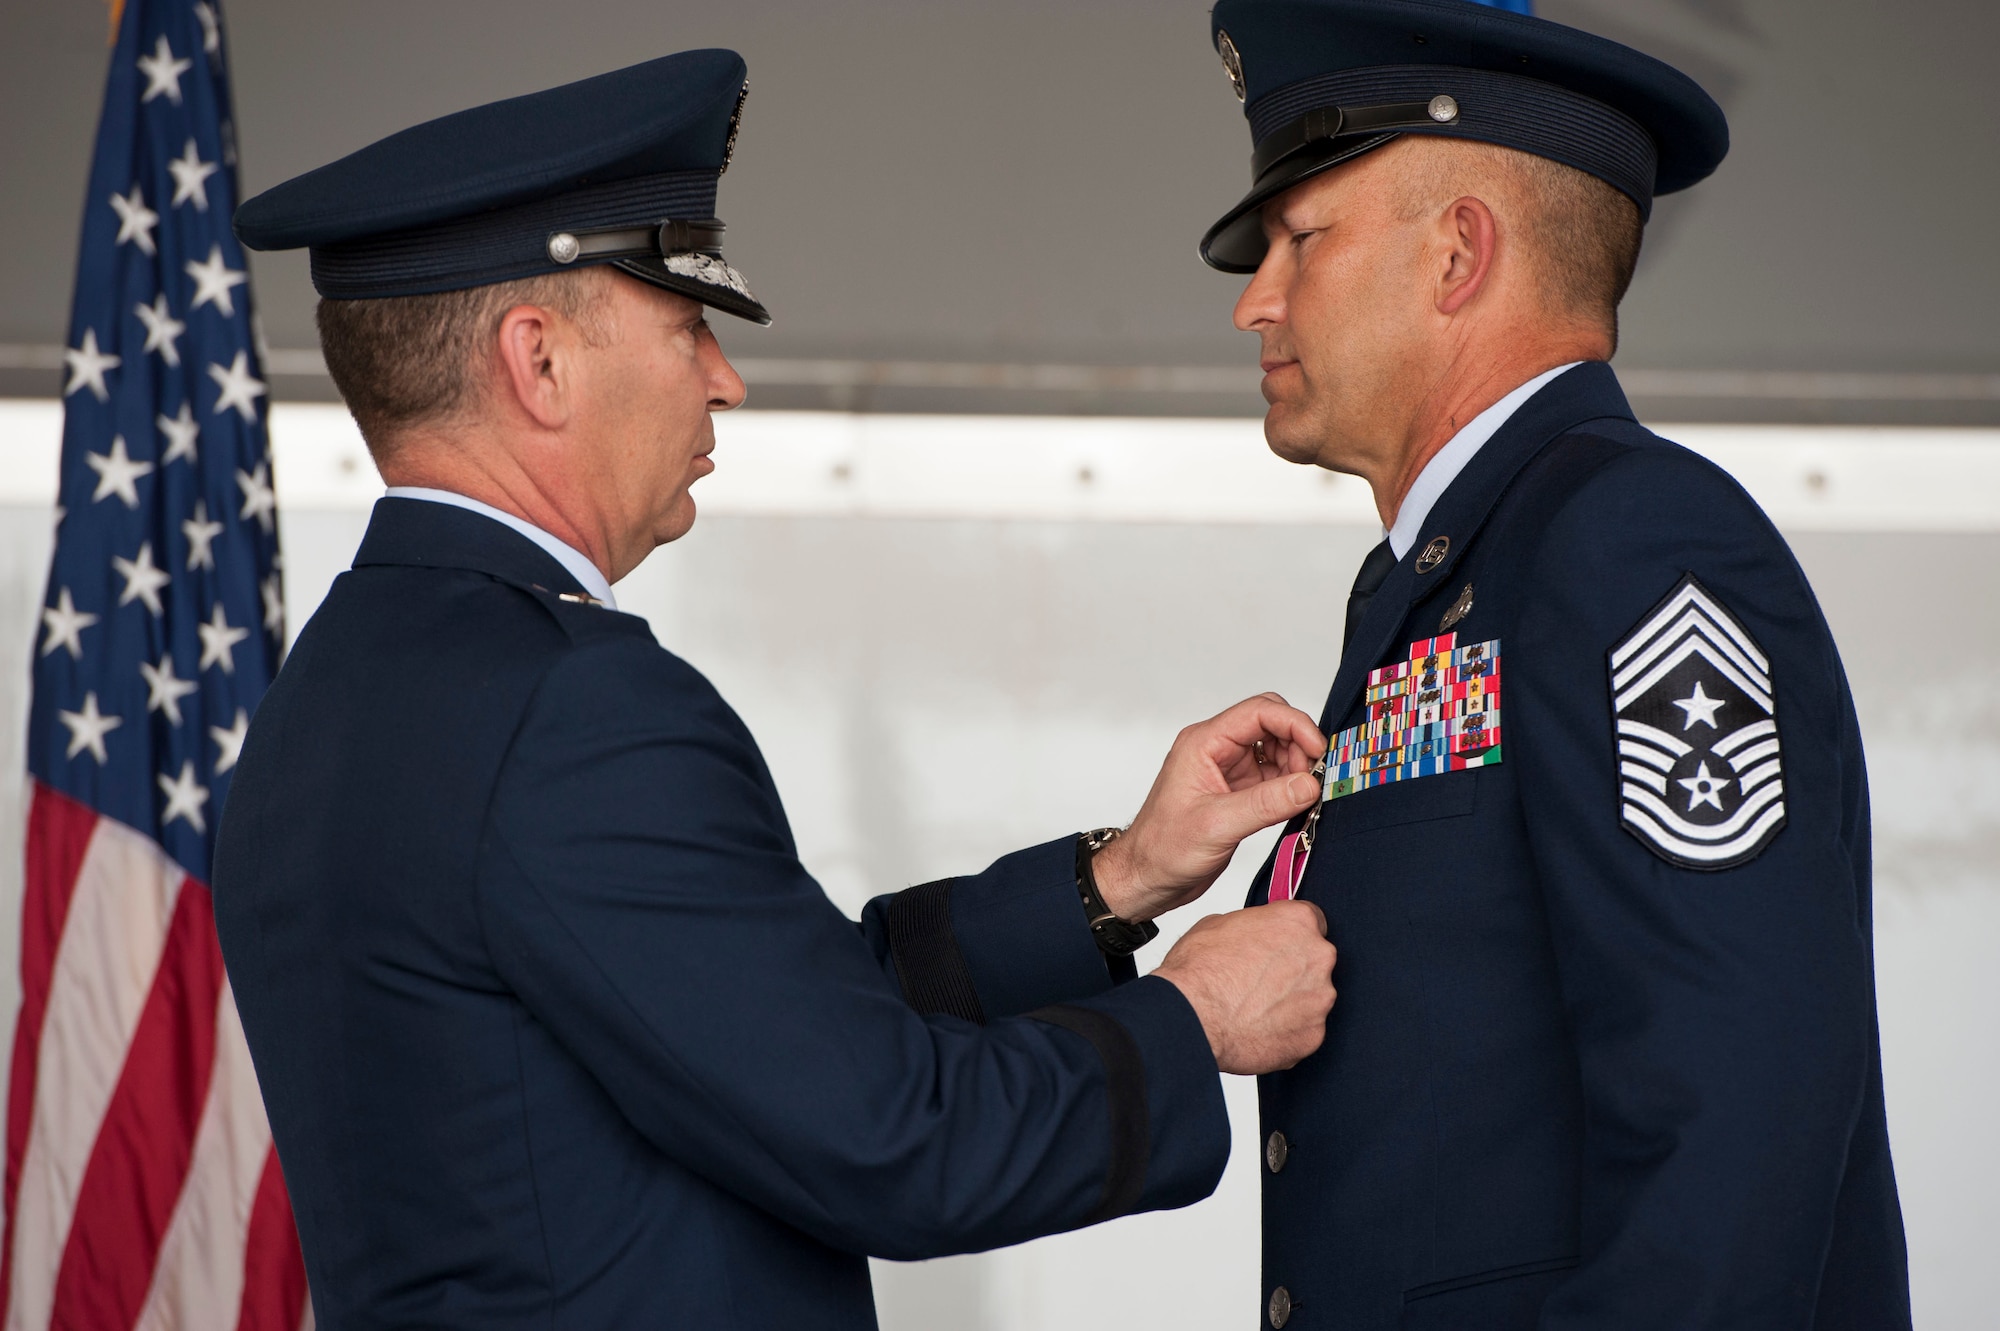 U.S. Air Force Brig. Gen. Chad Franks, senior executive officer to the Air Force vice chief of staff, pins the Legion of Merit medal on Chief Master Sgt. David Kelch, 23d Wing command chief, during a retirement ceremony at Moody Air Force Base, Ga., May 26, 2016. The Legion of Merit is awarded to members of the armed forces who have distinguished themselves by exceptionally meritorious conduct in the performance of outstanding service. (U.S. Air Force photo by Andrea Jenkins/Released)